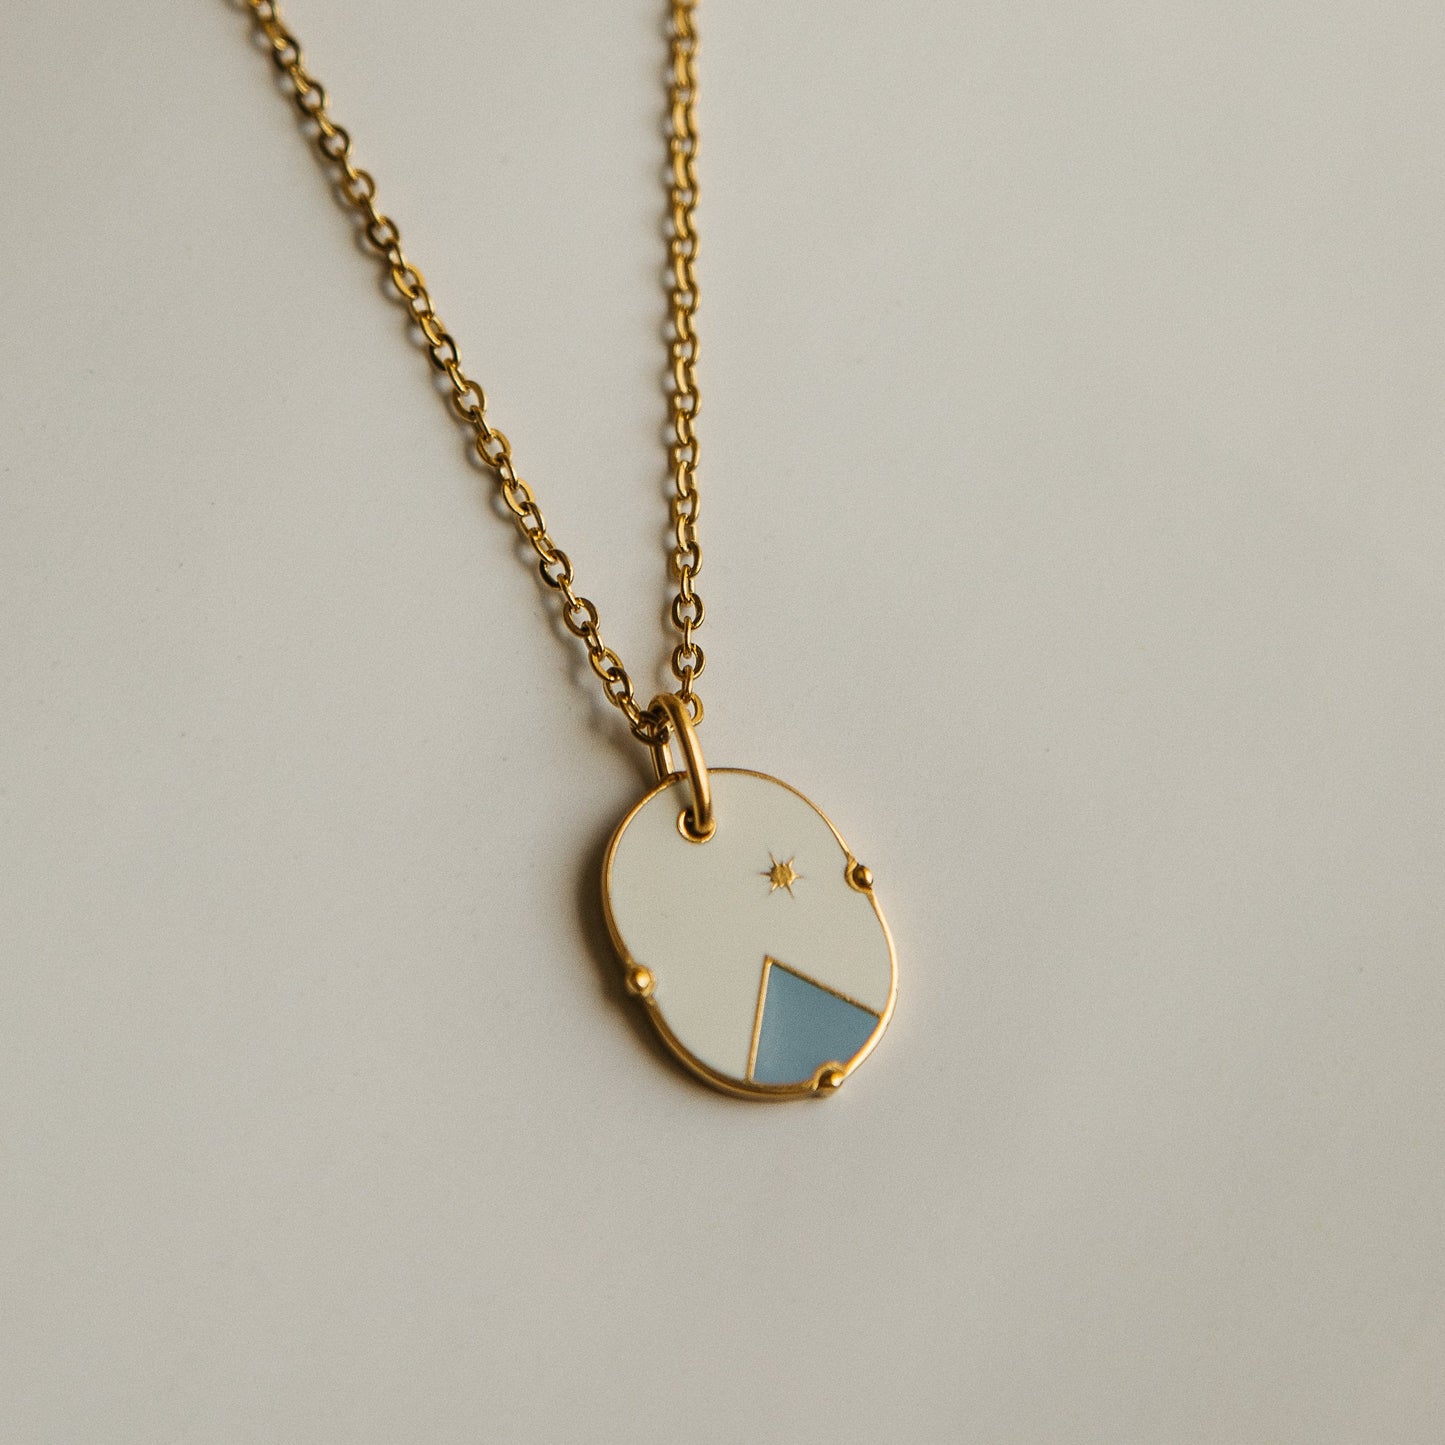 "On the right path" Necklace